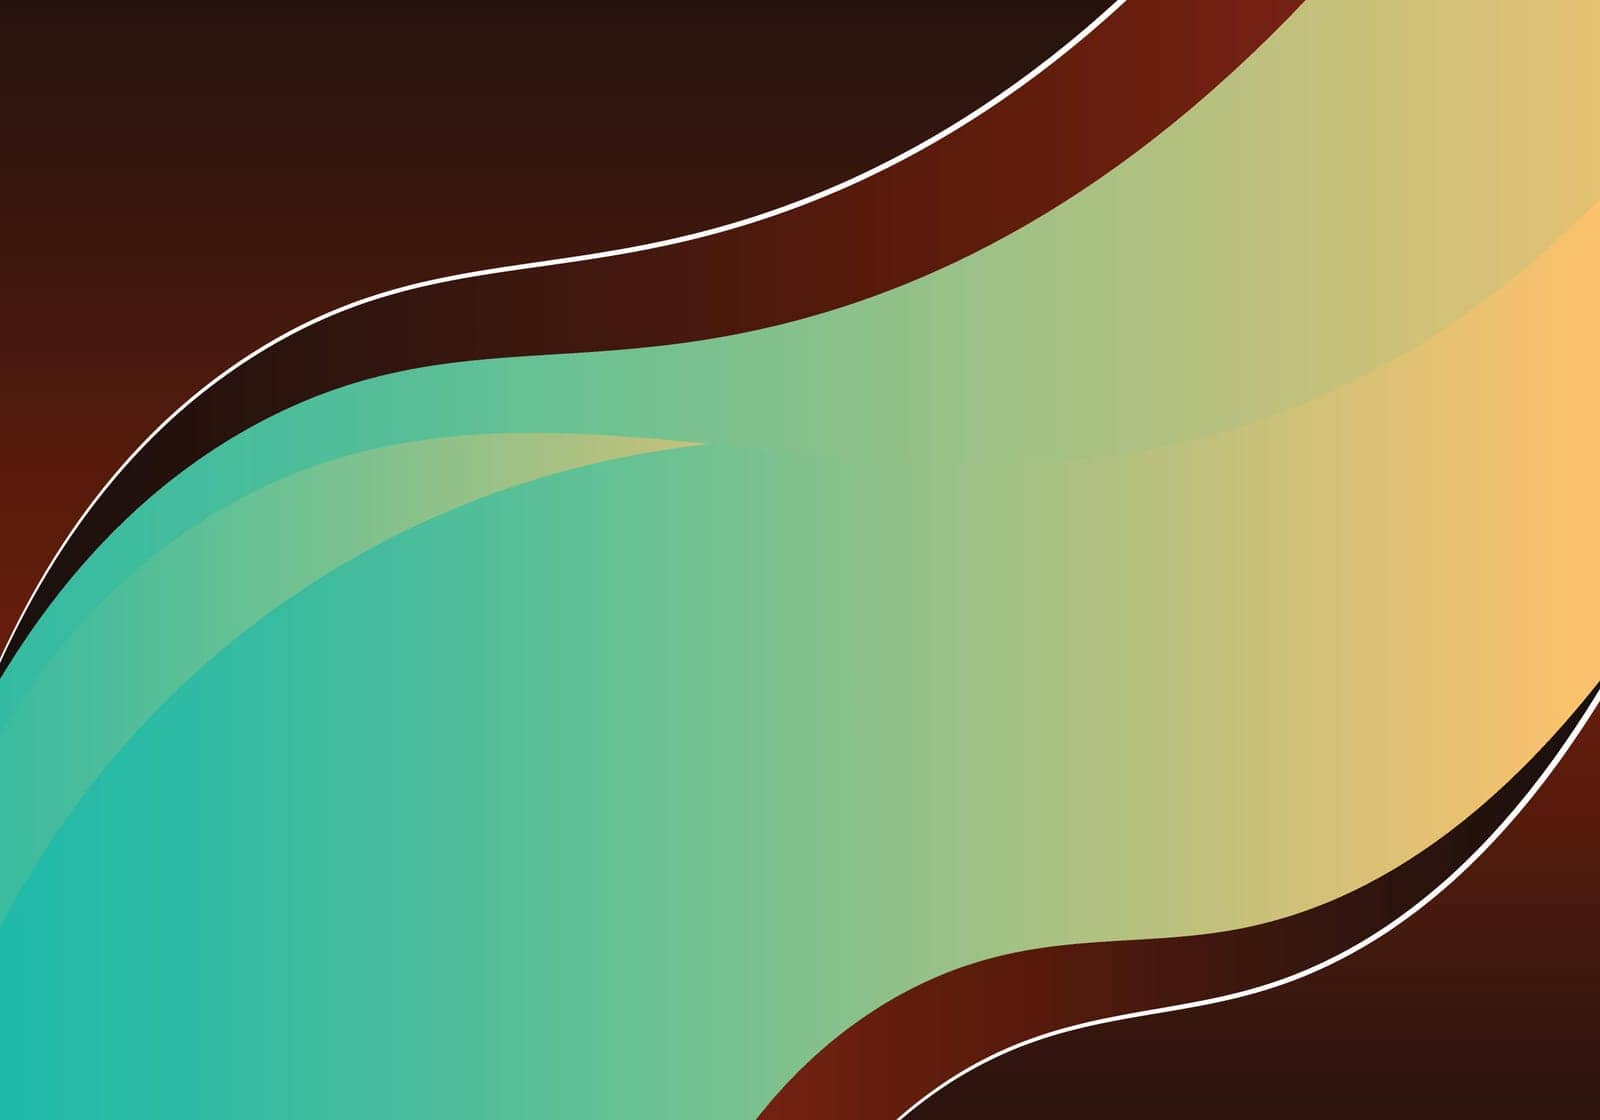 Curved background. Vector illustration. Abstract background.